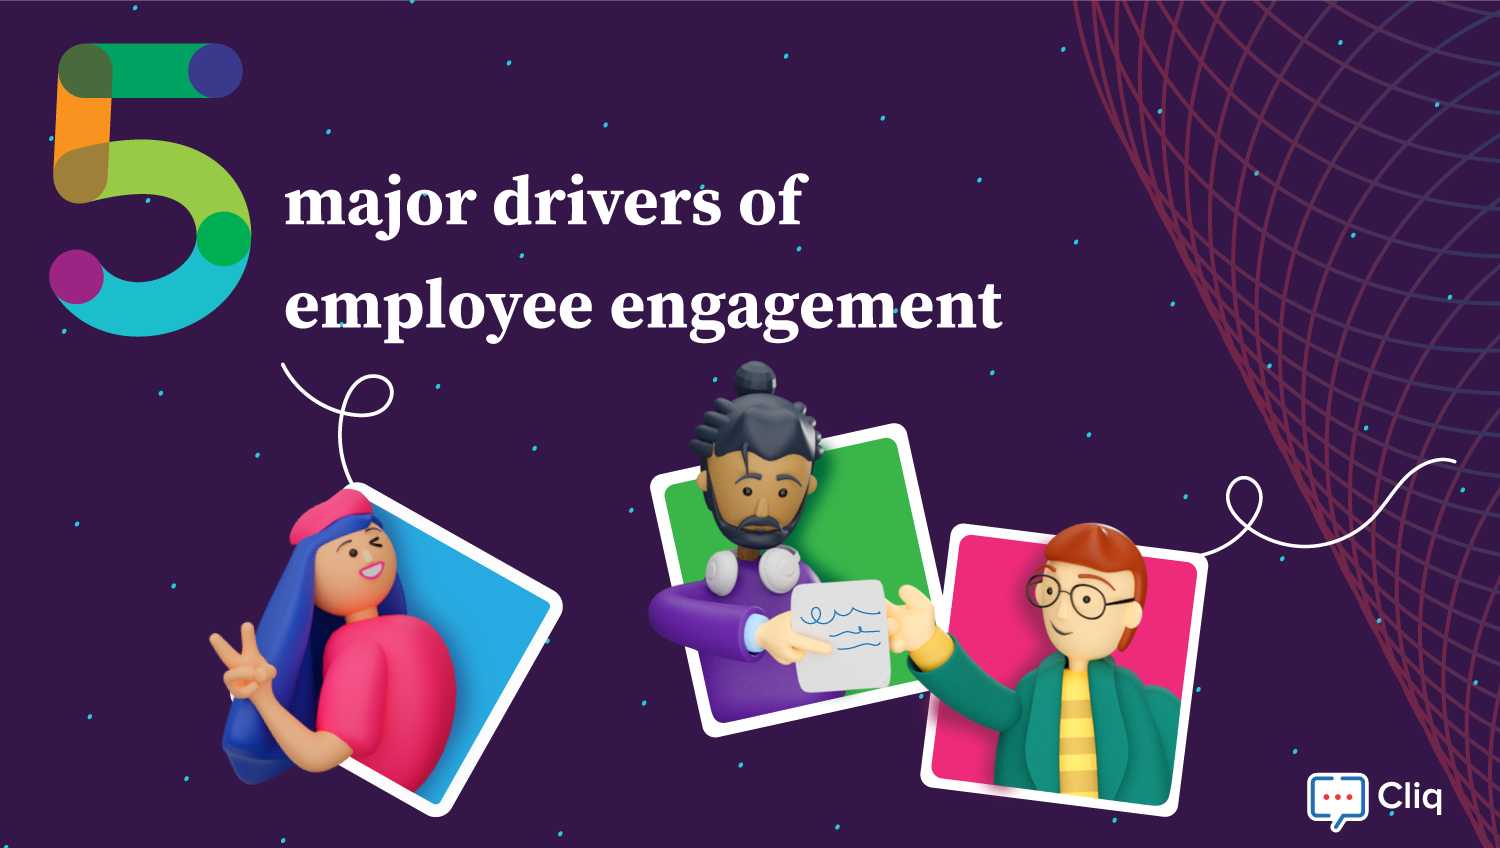 5 major drivers of employee engagement